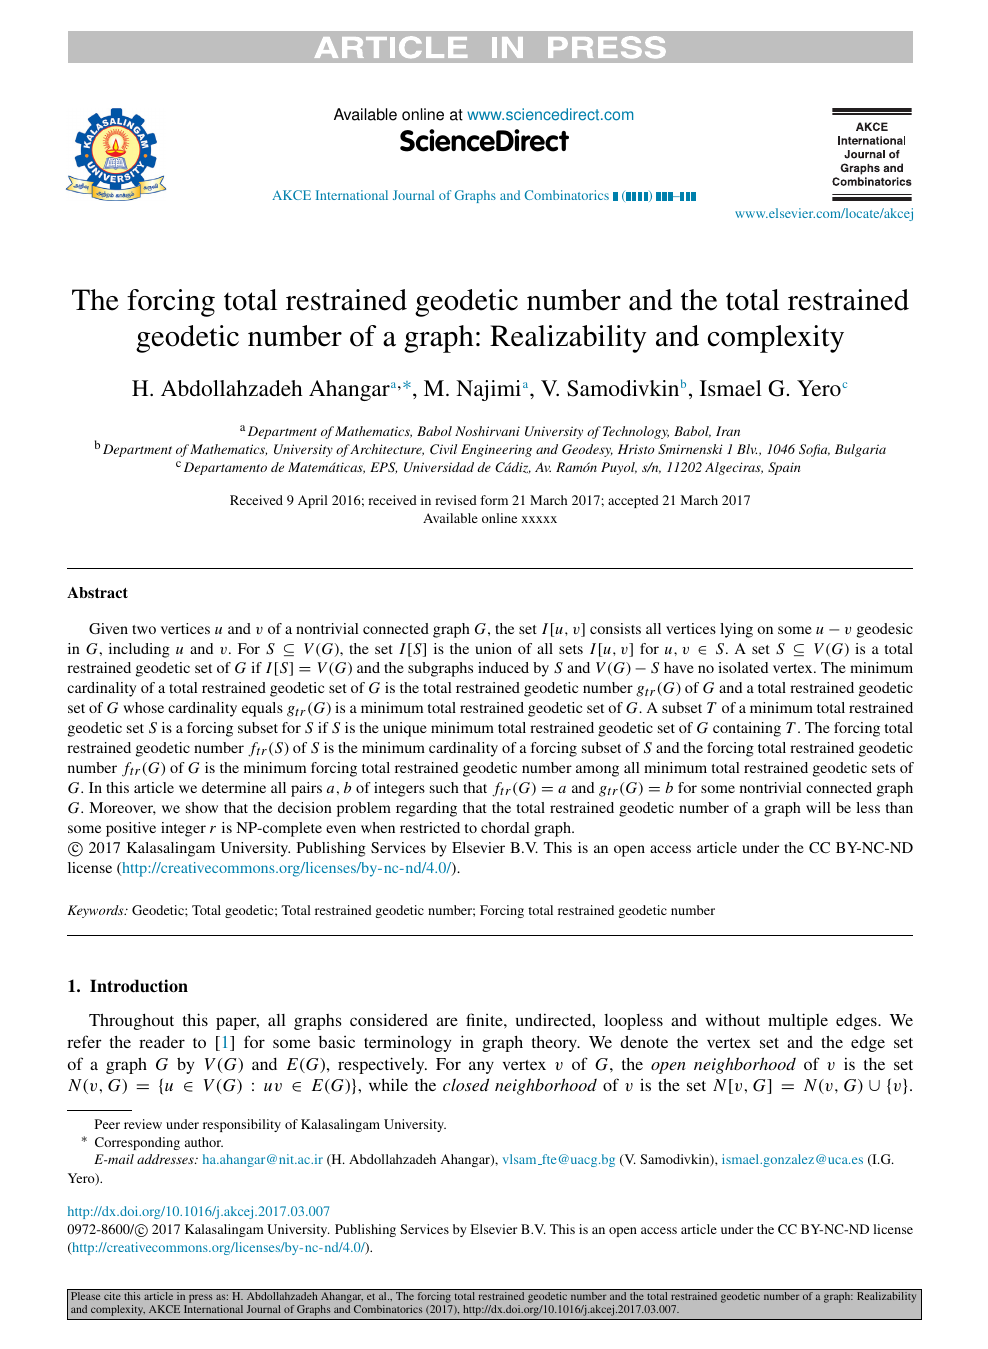 The Forcing Total Restrained Geodetic Number And The Total Restrained Geodetic Number Of A Graph Realizability And Complexity Topic Of Research Paper In Computer And Information Sciences Download Scholarly Article Pdf